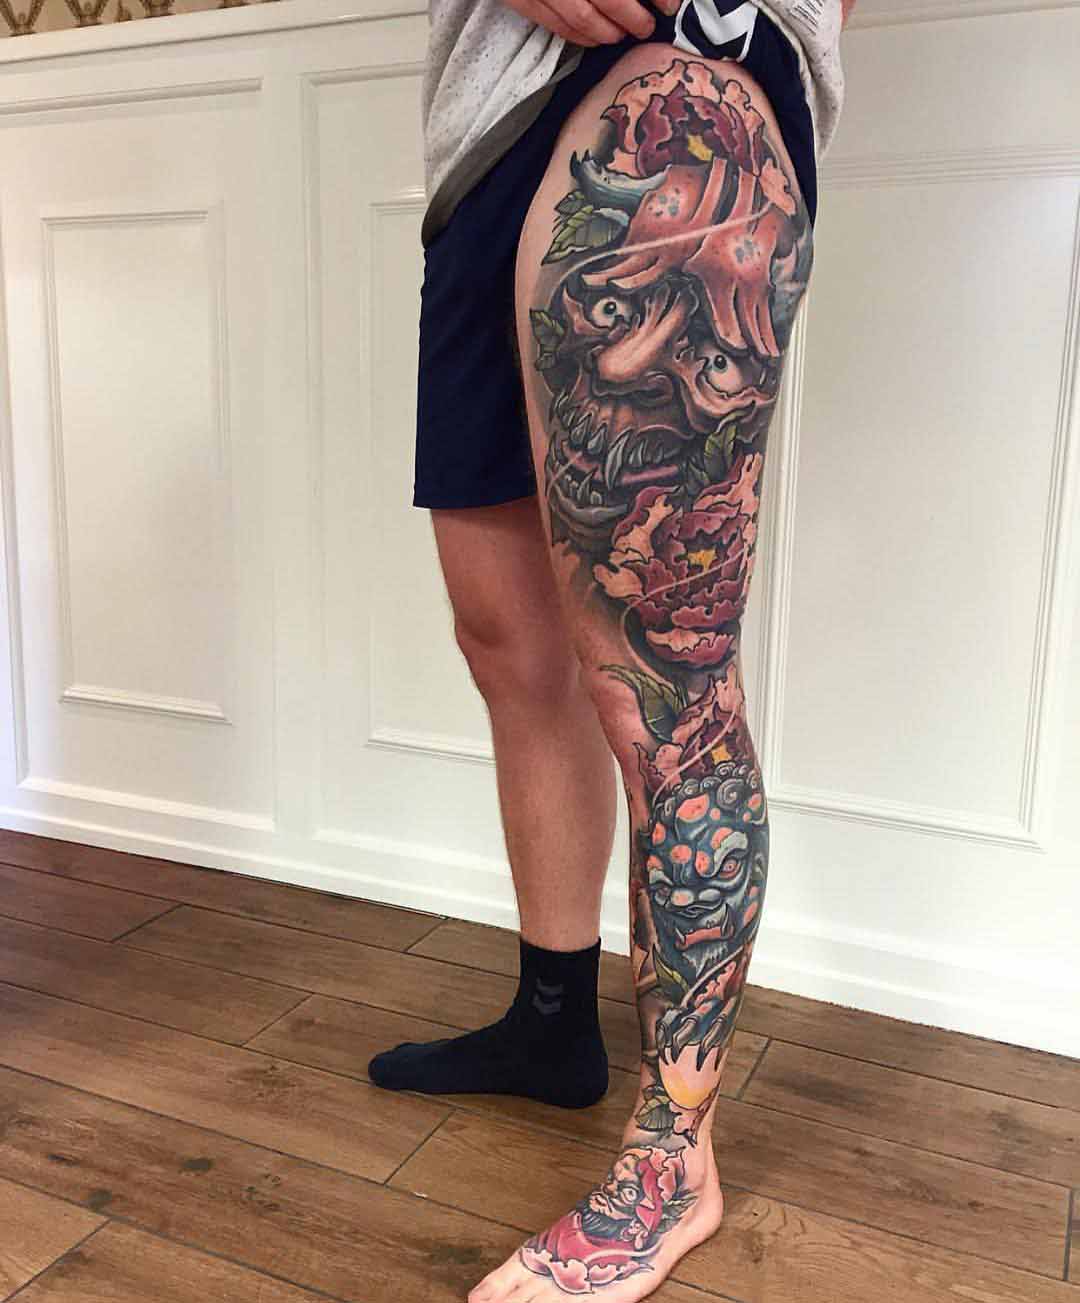 The other side of the leg sleeve  Daragh Locke Tattoos  Facebook